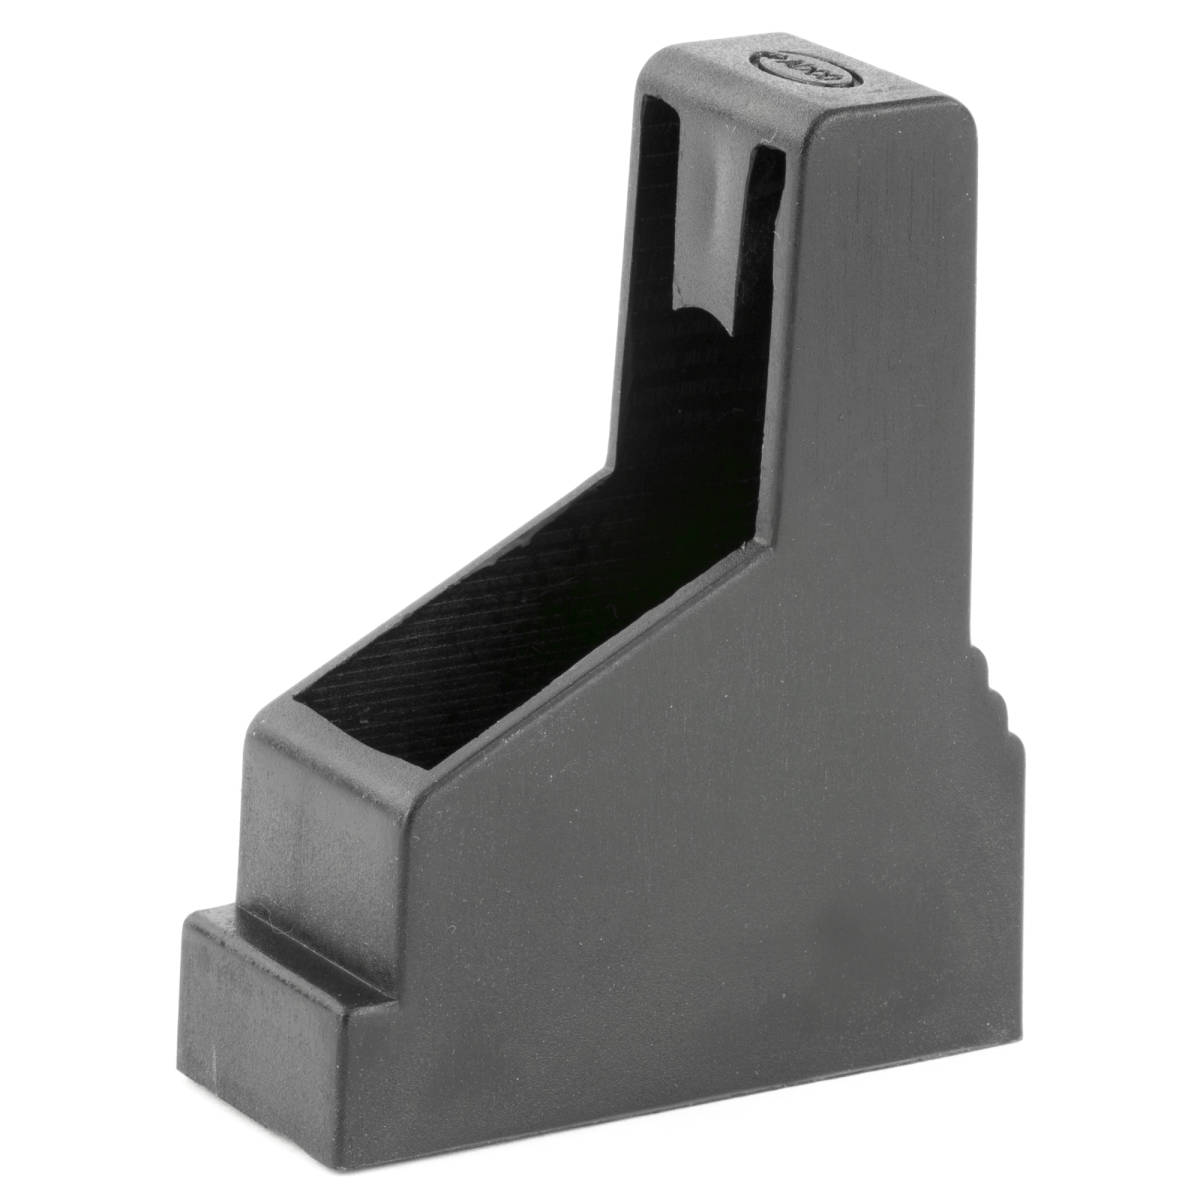 ADCO ST3 Super Thumb Mag Loader Single Stack Style, Black Polymer, For...-img-0